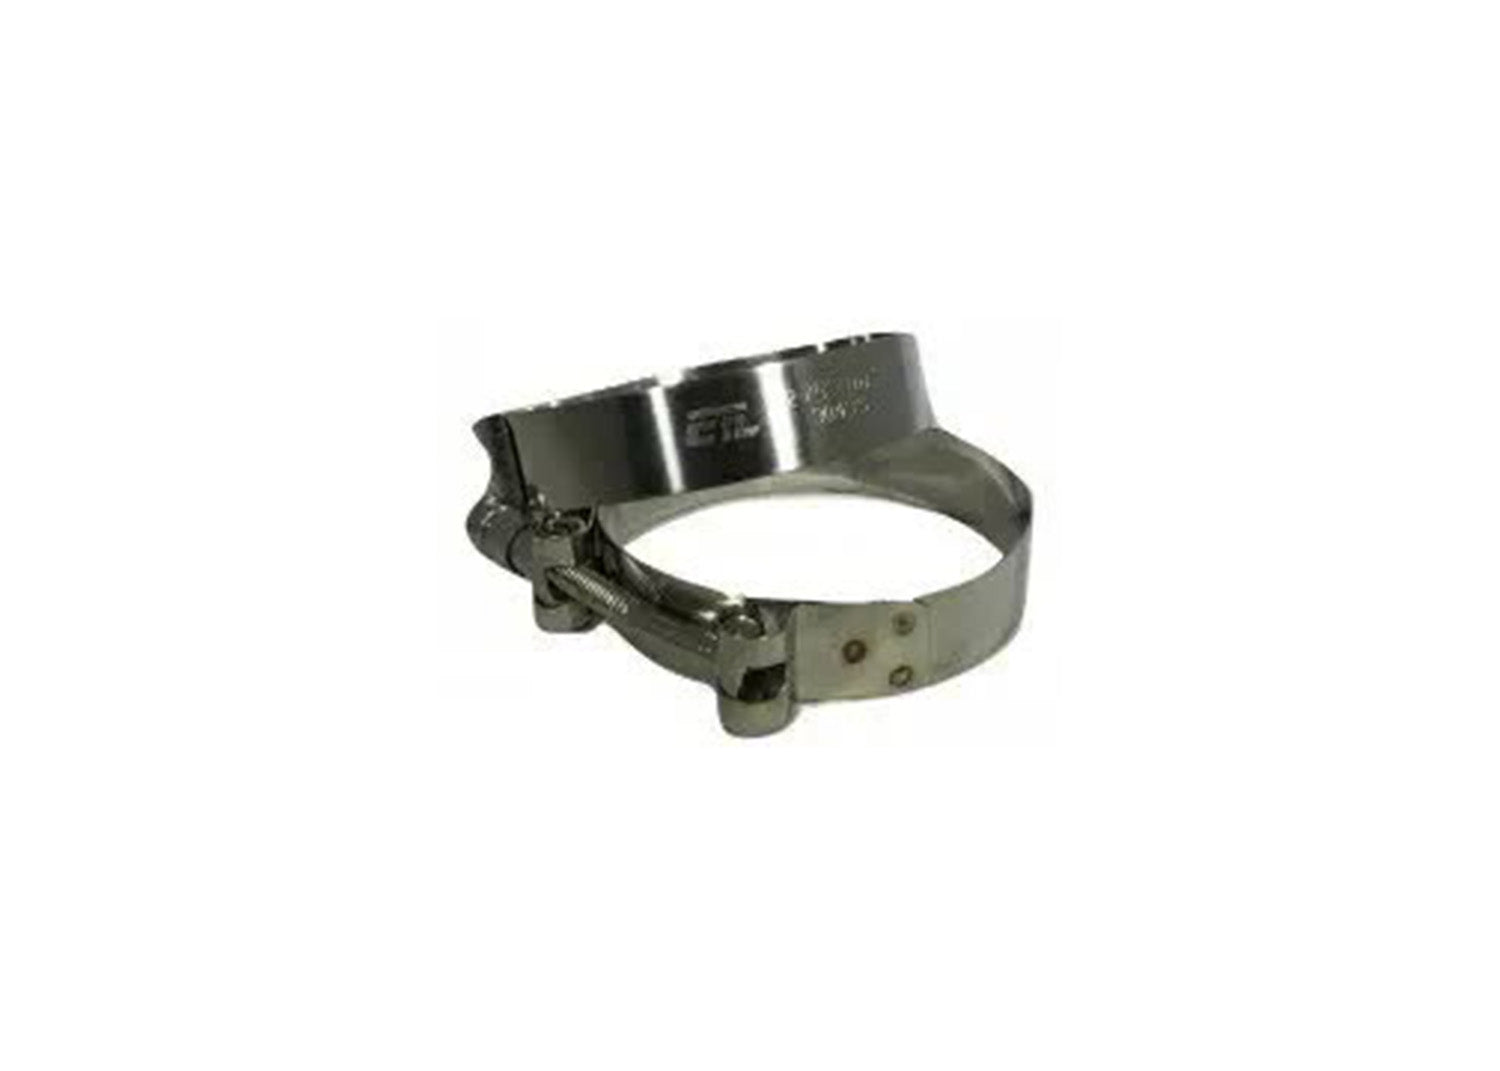 T-Bolt Clamp for use with 1.25" or 1.50" Inside Diameter Hose Couplings Part Number-221002